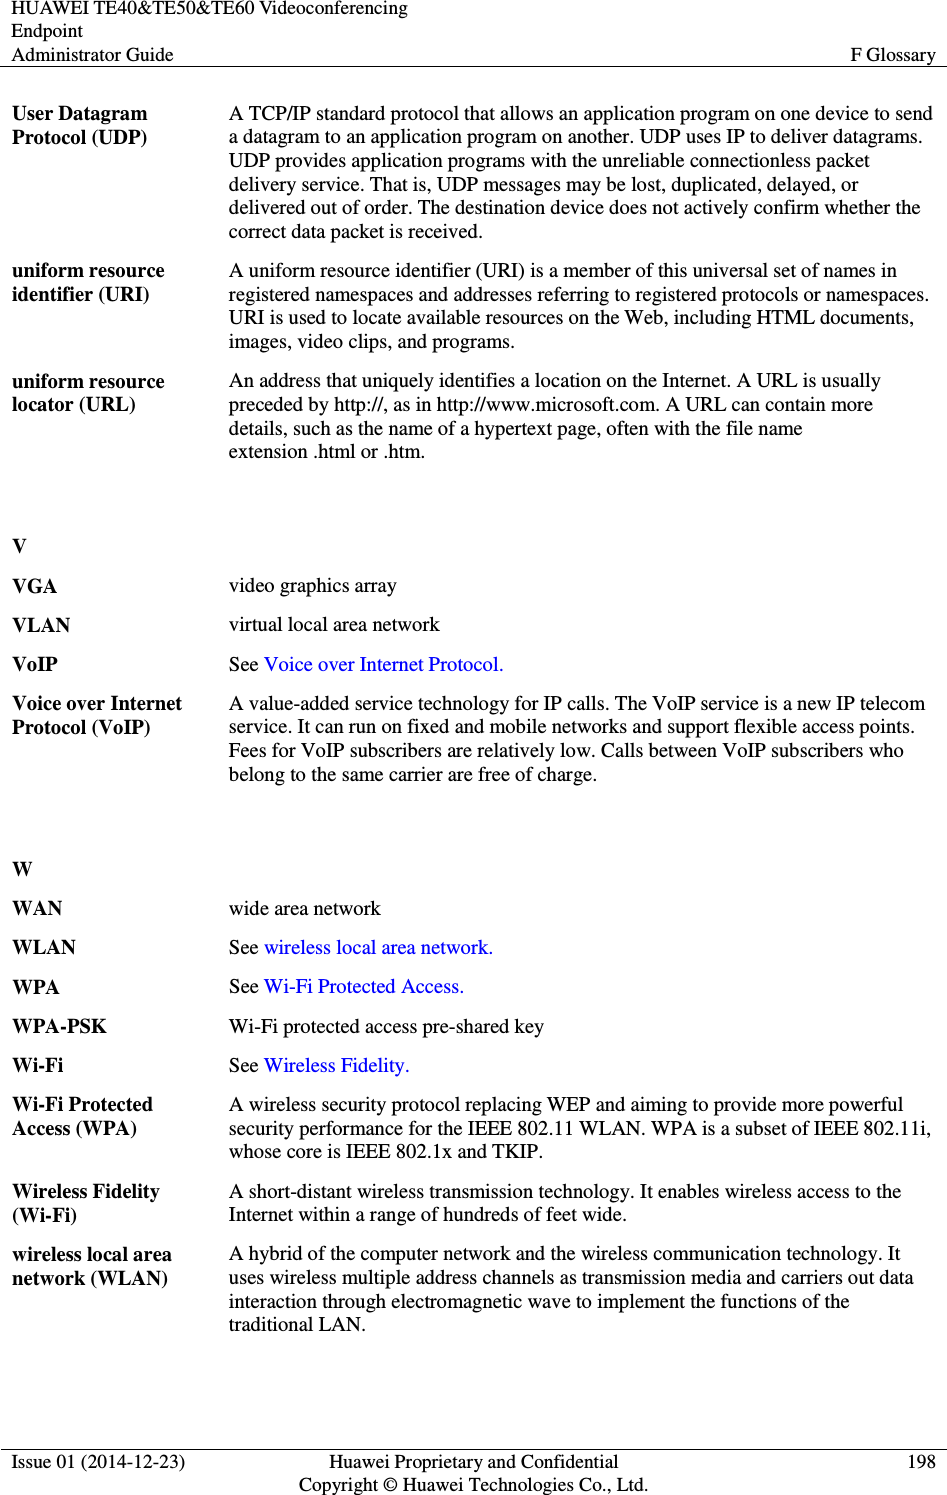 HUAWEI TE40&amp;TE50&amp;TE60 Videoconferencing Endpoint Administrator Guide  F Glossary  Issue 01 (2014-12-23)  Huawei Proprietary and Confidential                                     Copyright © Huawei Technologies Co., Ltd. 198  User Datagram Protocol (UDP) A TCP/IP standard protocol that allows an application program on one device to send a datagram to an application program on another. UDP uses IP to deliver datagrams. UDP provides application programs with the unreliable connectionless packet delivery service. That is, UDP messages may be lost, duplicated, delayed, or delivered out of order. The destination device does not actively confirm whether the correct data packet is received. uniform resource identifier (URI) A uniform resource identifier (URI) is a member of this universal set of names in registered namespaces and addresses referring to registered protocols or namespaces. URI is used to locate available resources on the Web, including HTML documents, images, video clips, and programs. uniform resource locator (URL) An address that uniquely identifies a location on the Internet. A URL is usually preceded by http://, as in http://www.microsoft.com. A URL can contain more details, such as the name of a hypertext page, often with the file name extension .html or .htm.   V  VGA video graphics array VLAN virtual local area network VoIP See Voice over Internet Protocol. Voice over Internet Protocol (VoIP) A value-added service technology for IP calls. The VoIP service is a new IP telecom service. It can run on fixed and mobile networks and support flexible access points. Fees for VoIP subscribers are relatively low. Calls between VoIP subscribers who belong to the same carrier are free of charge.   W  WAN wide area network WLAN See wireless local area network. WPA See Wi-Fi Protected Access. WPA-PSK Wi-Fi protected access pre-shared key Wi-Fi See Wireless Fidelity. Wi-Fi Protected Access (WPA) A wireless security protocol replacing WEP and aiming to provide more powerful security performance for the IEEE 802.11 WLAN. WPA is a subset of IEEE 802.11i, whose core is IEEE 802.1x and TKIP. Wireless Fidelity (Wi-Fi) A short-distant wireless transmission technology. It enables wireless access to the Internet within a range of hundreds of feet wide. wireless local area network (WLAN) A hybrid of the computer network and the wireless communication technology. It uses wireless multiple address channels as transmission media and carriers out data interaction through electromagnetic wave to implement the functions of the traditional LAN.   